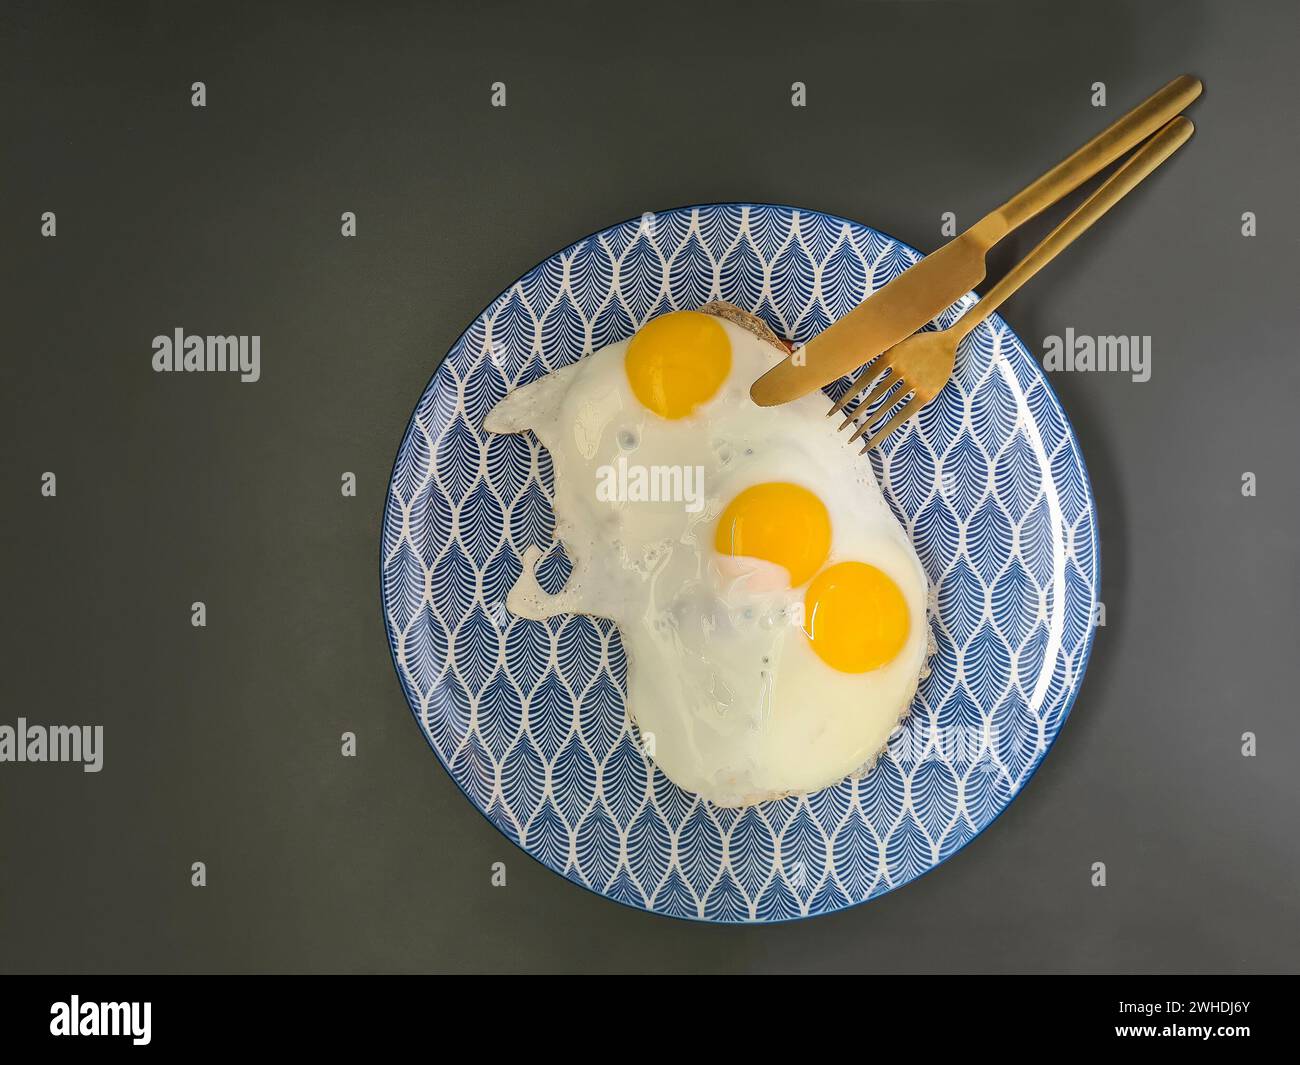 Three fried eggs on a blue and white plate with gold-colored cutlery, knife and fork Stock Photo